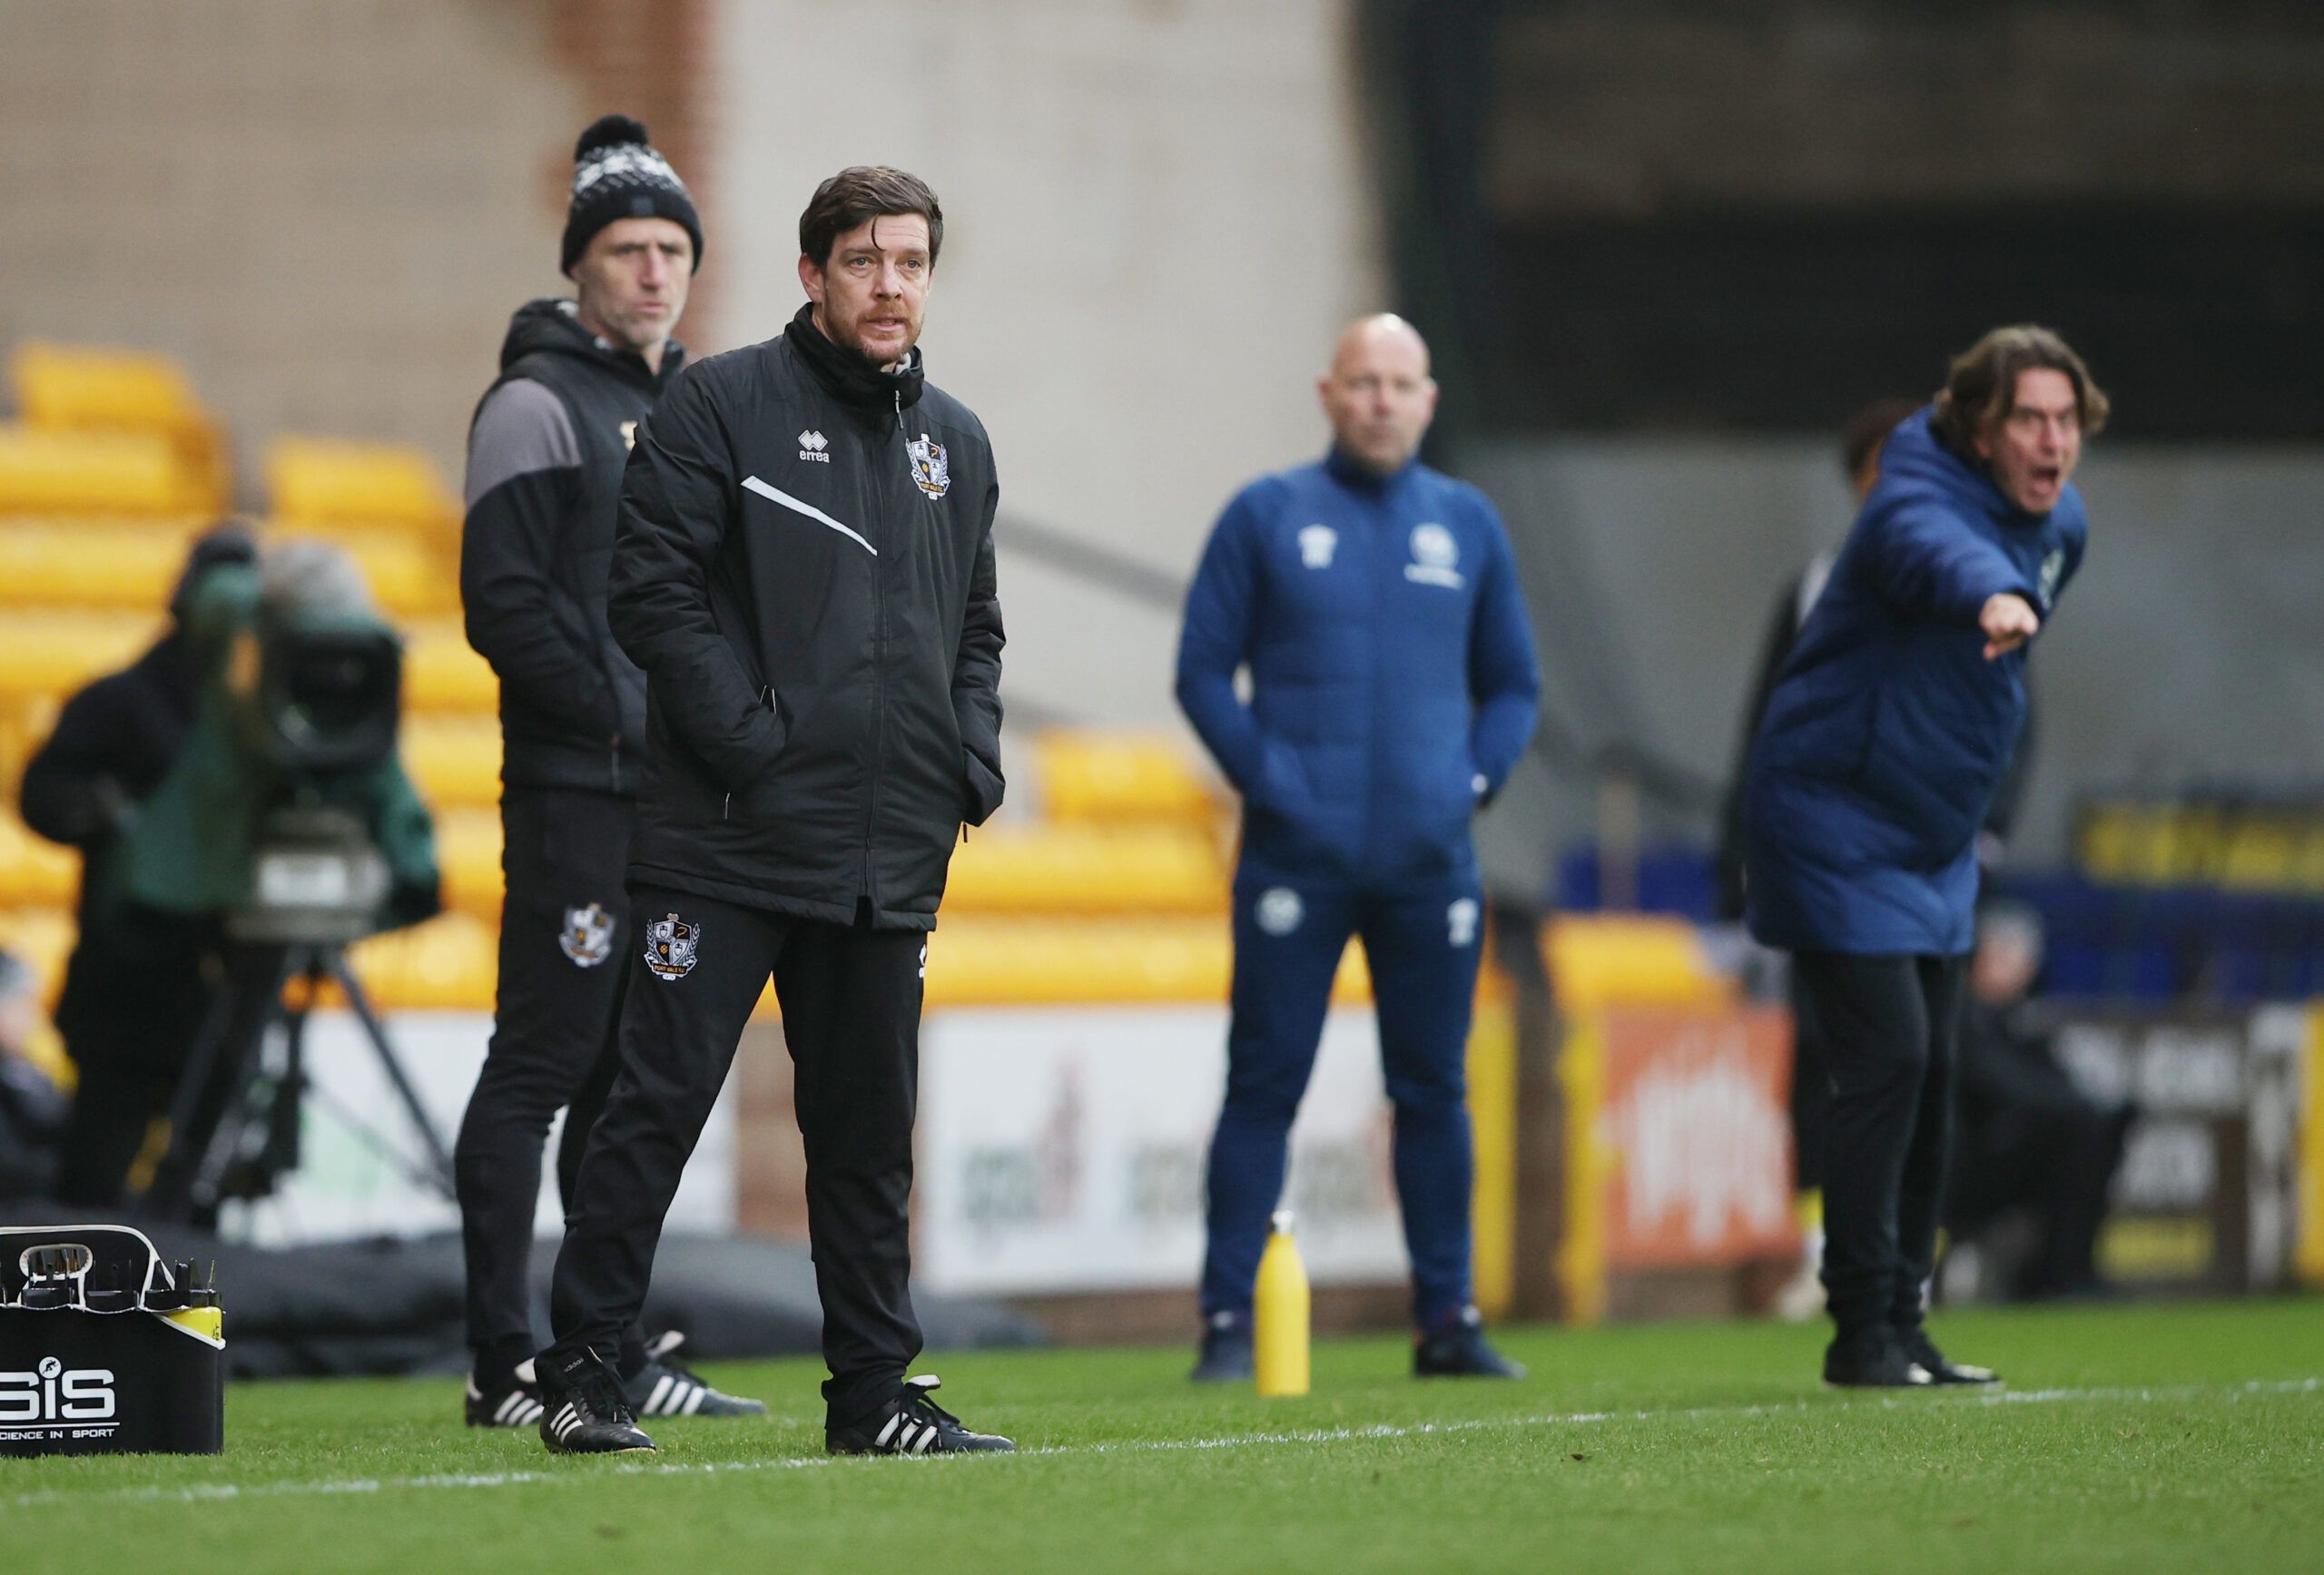 Soccer Football - FA Cup Third Round - Port Vale v Brentford - Vale Park, Stoke-on-Trent, Britain - January 8, 2022  Port Vale manager Darrell Clarke and Brentford manager Thomas Frank react Action Images via Reuters/Molly Darlington